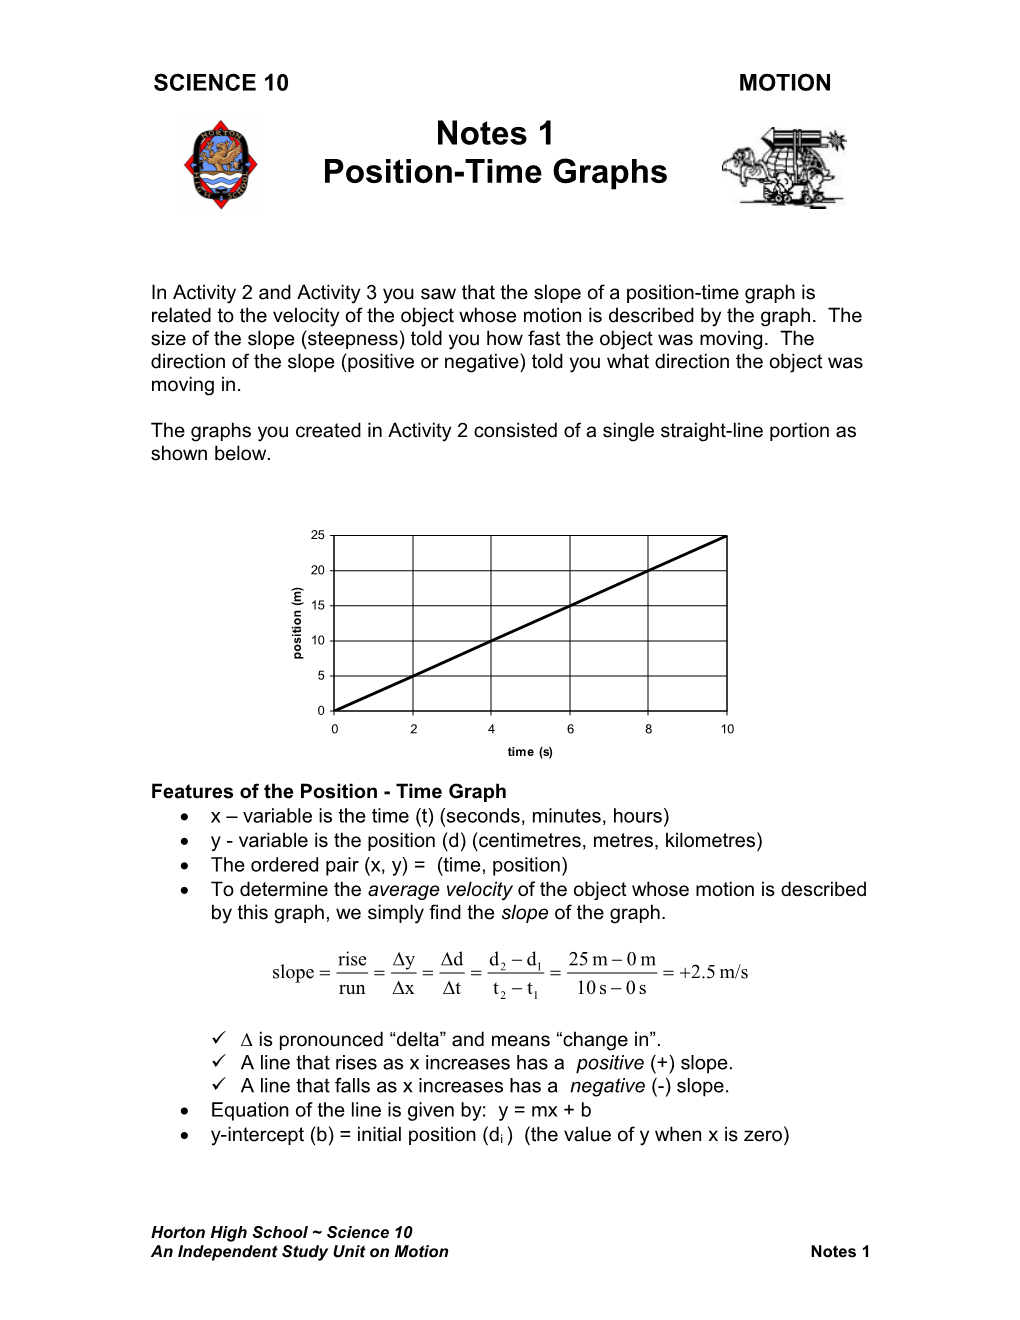 Position-Time Graphs